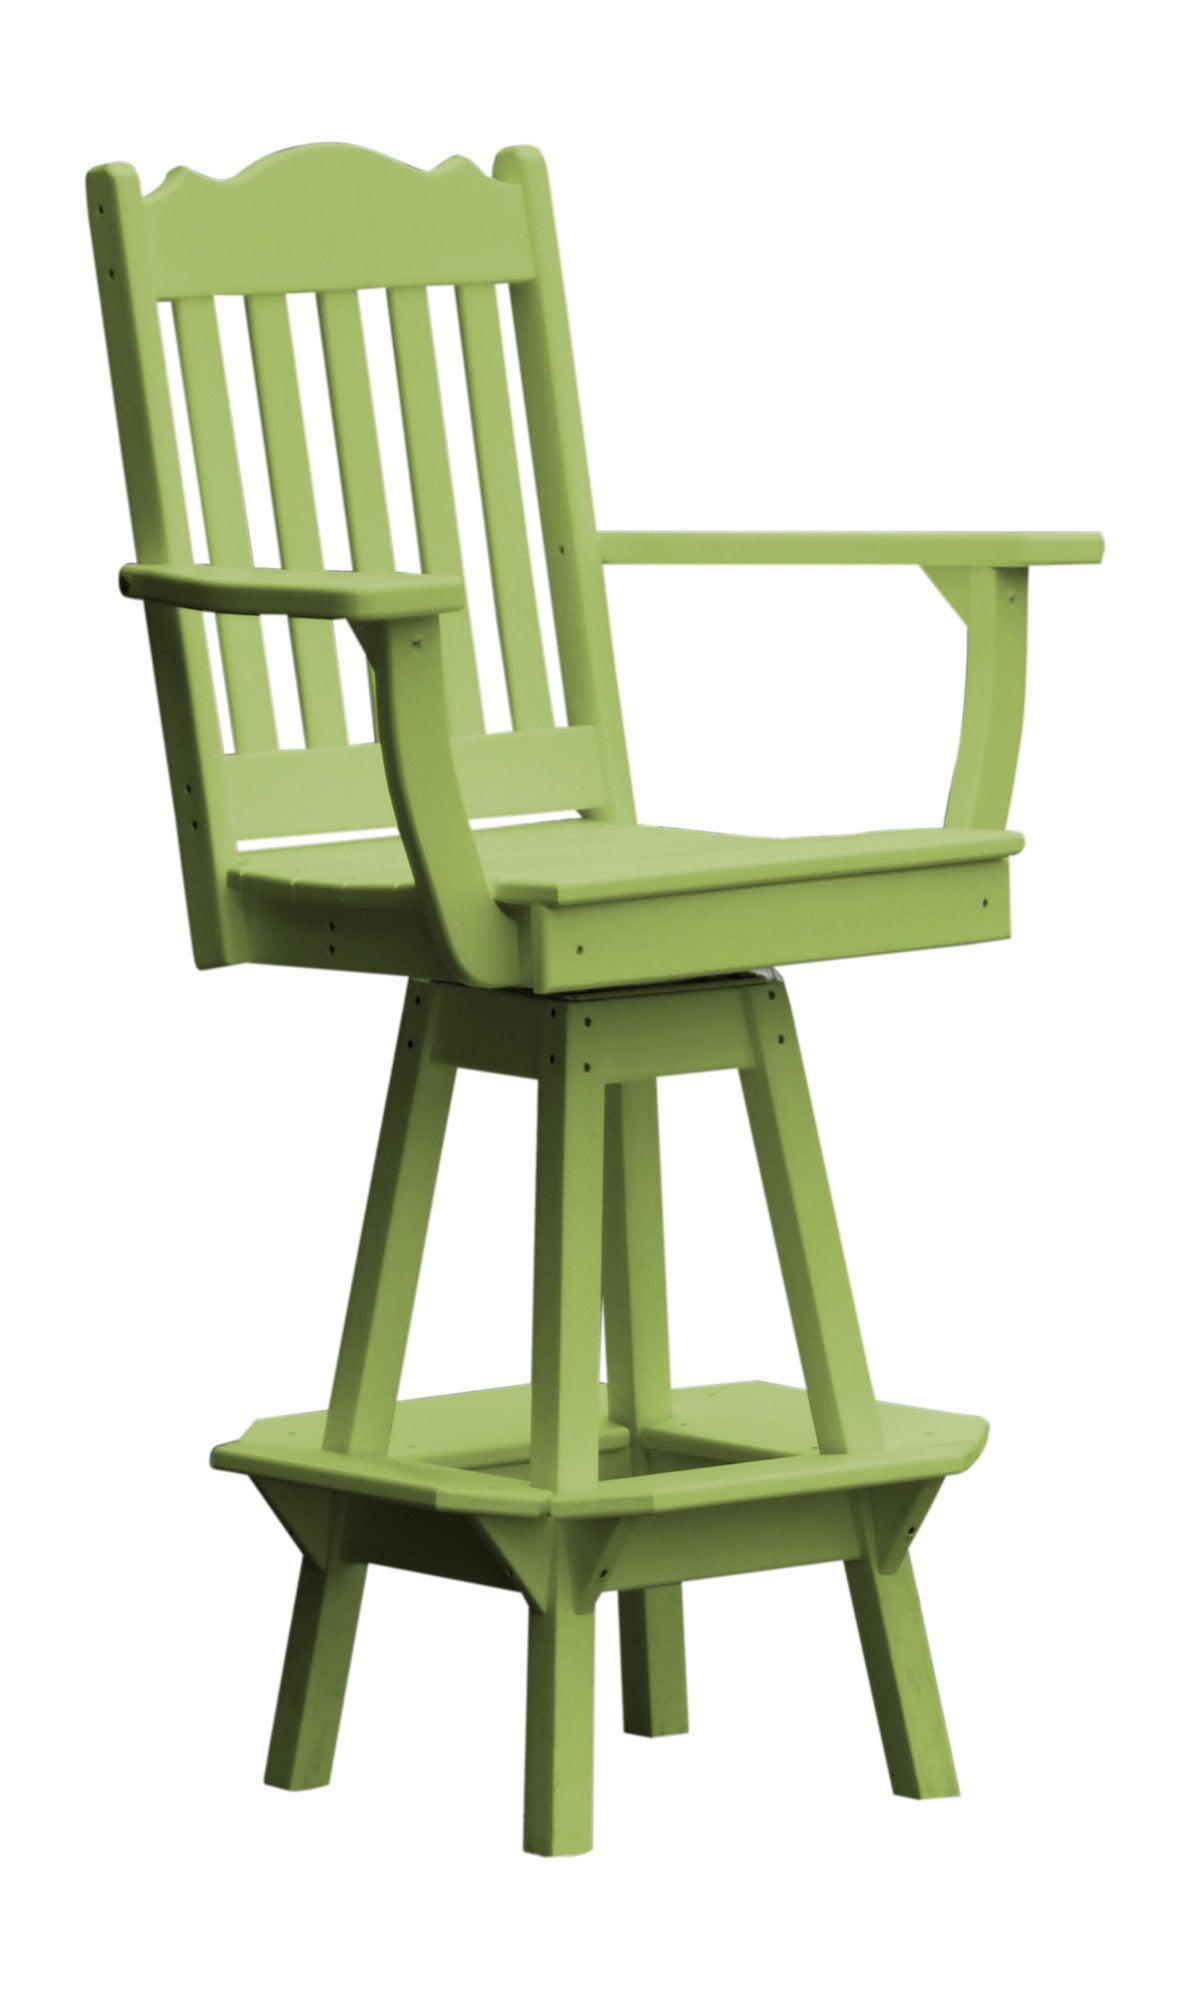 A&L Furniture Company Recycled Plastic Royal Swivel Bar Chair w/ Arms - Tropical Lime